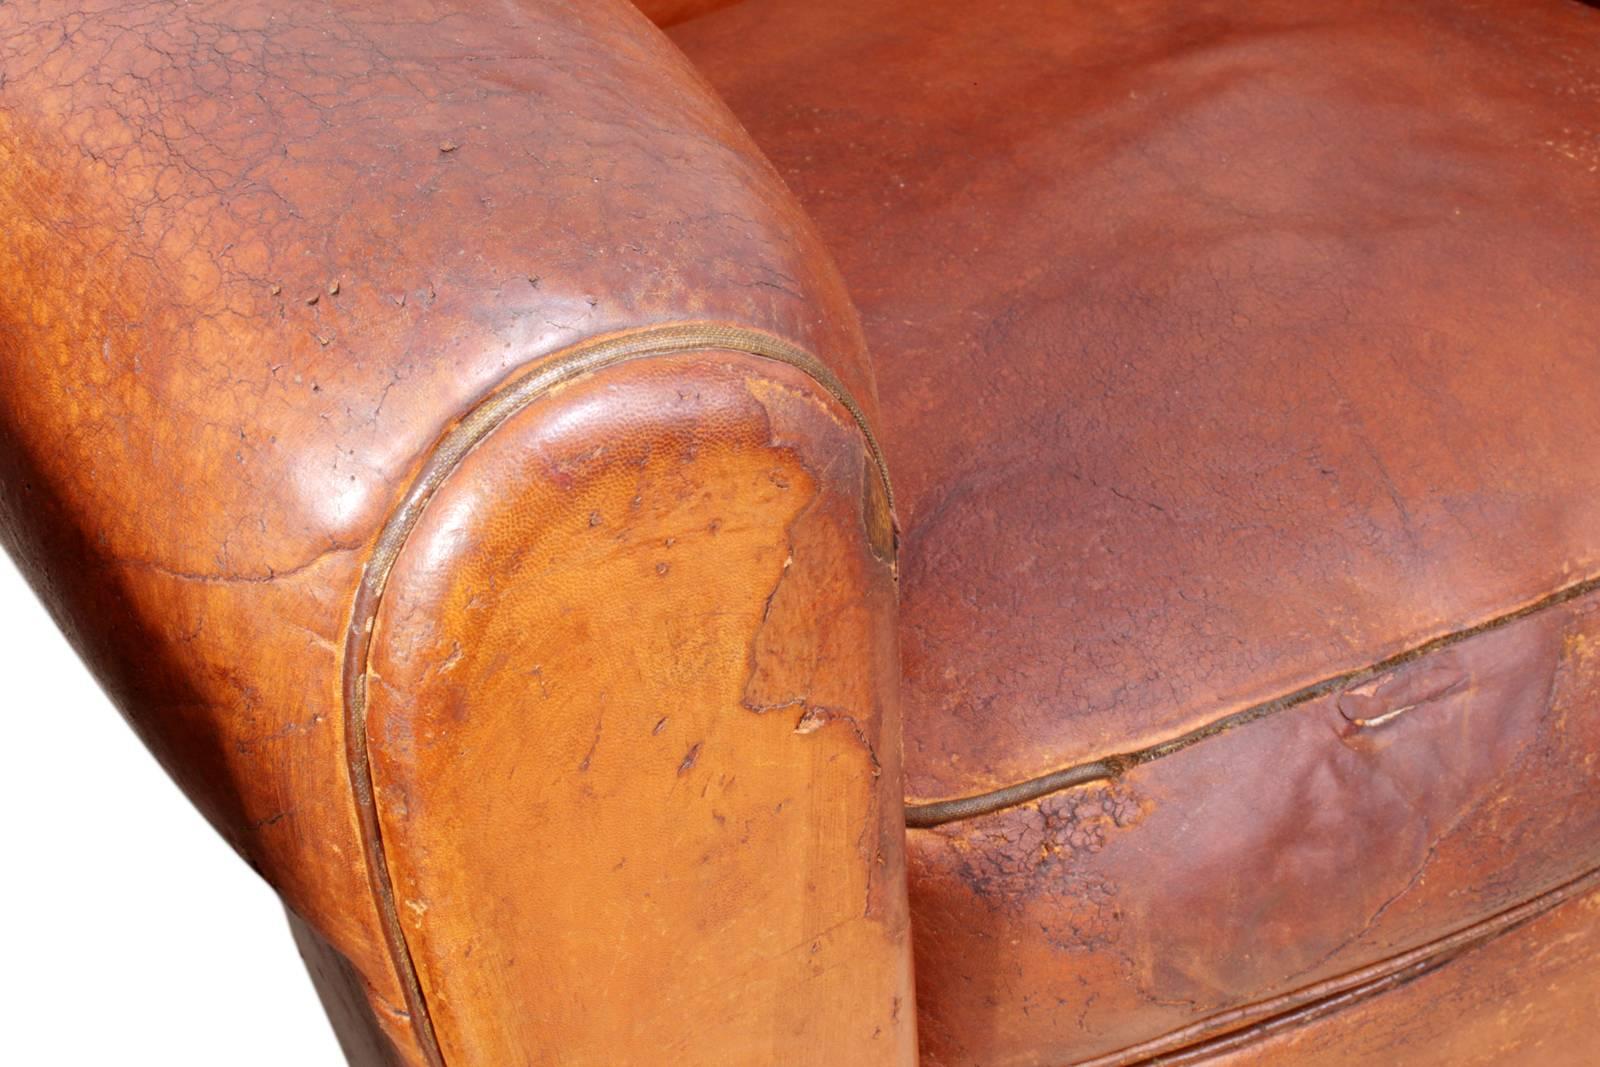 Pair of French leather club chairs
A pair of French leather club chairs a very good typical French 1930s shape, solid frames and coil sprung, leather is good, has been fed and conditioned these chairs have had a few repairs

Age: 1930

Style: